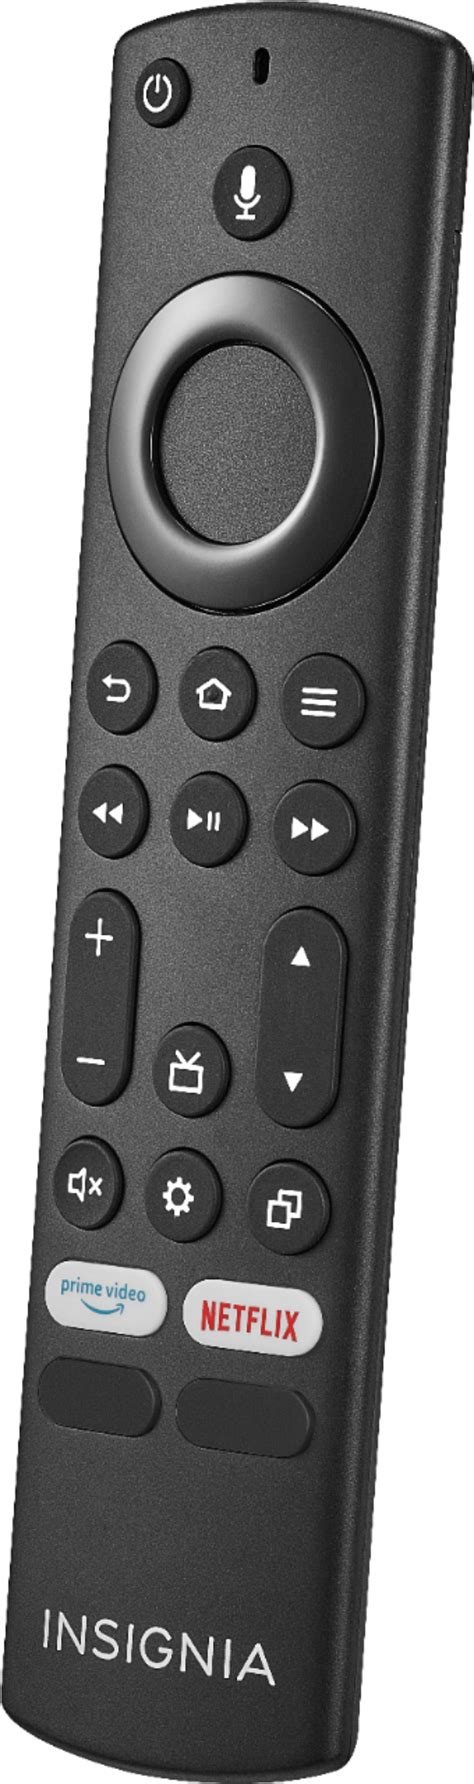  To connect your Insignia™ - 8-Device Backlit Universal Remote to your verizon cable box, please follow these instructions: 1. Turn on your TV and Verizon Cable Box and point your Insignia universal remote control at it. 2. Press the device button you want to set up (for example TV). 3. . 